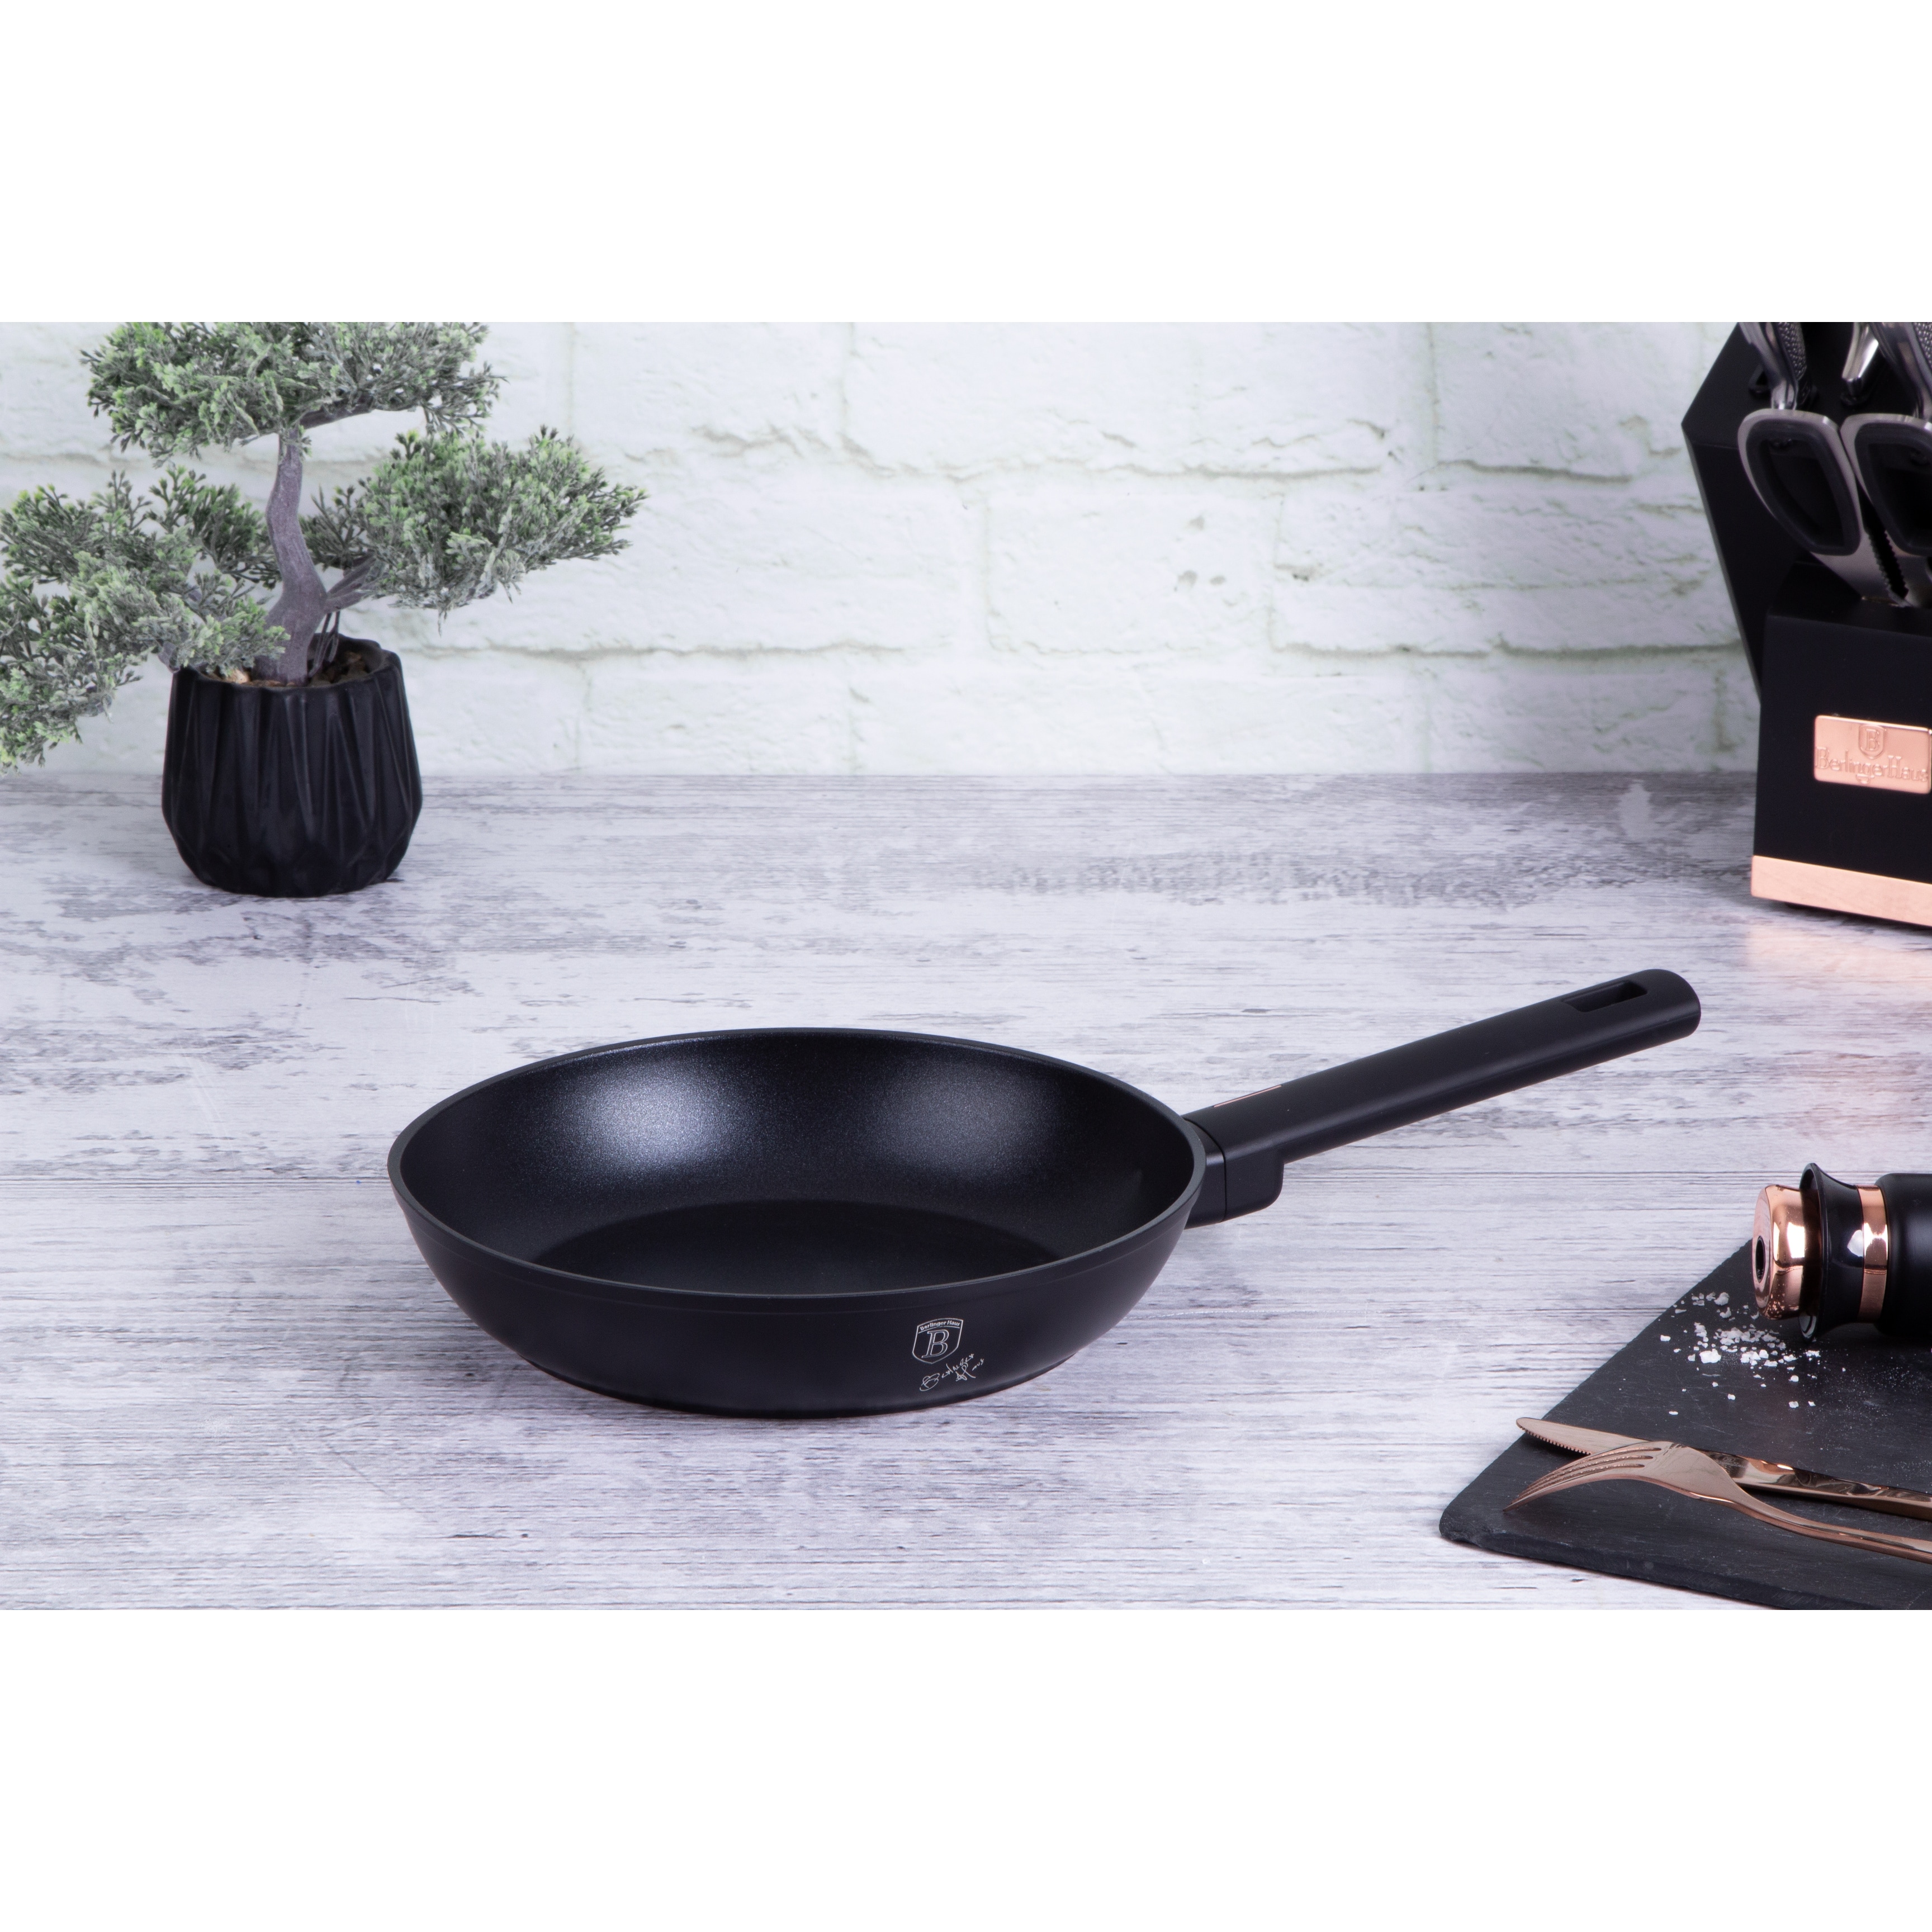 https://ak1.ostkcdn.com/images/products/is/images/direct/a1b99c3836aaf6a8445e0d016a44c890c0a15807/Berlinger-Haus-Kitchen-Cookware-Sets-12-Piece%2C-Nonstick-Cookware-Set%2C-Turbo-Induction-Based-Pots-and-Pans-Set.jpg